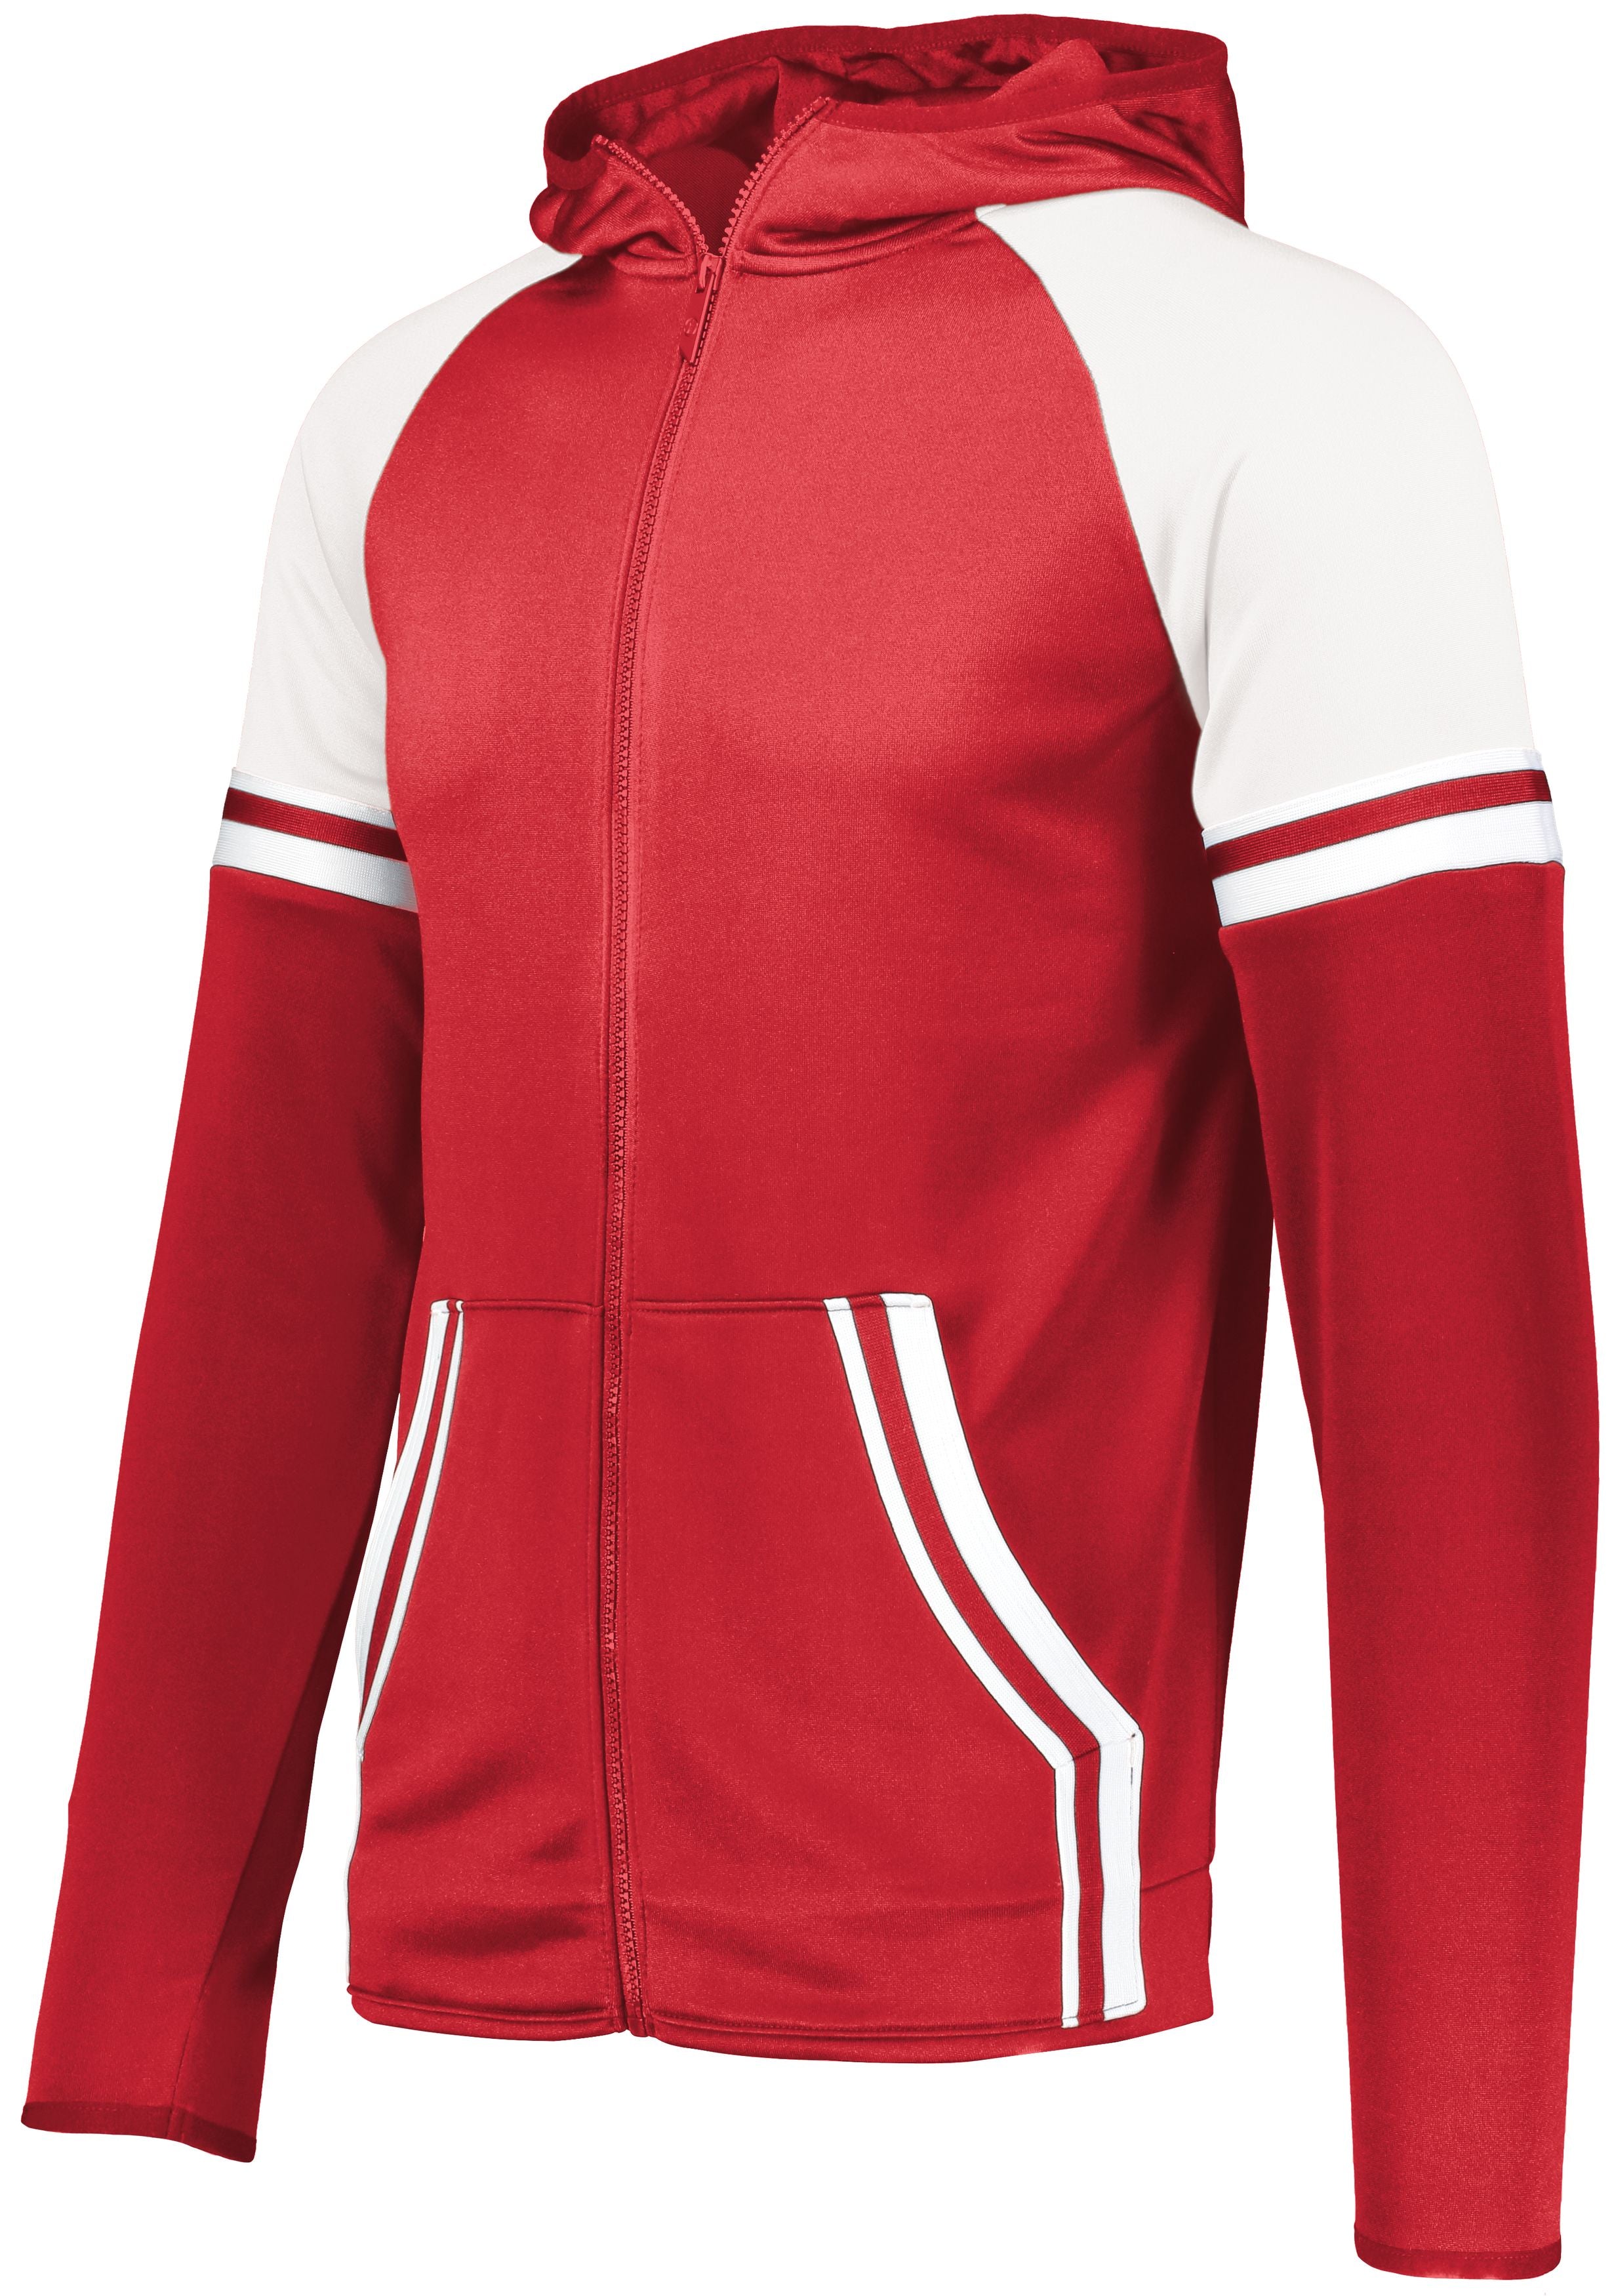 Holloway Retro Grade Jacket in Scarlet/White  -Part of the Adult, Adult-Jacket, Holloway, Outerwear product lines at KanaleyCreations.com